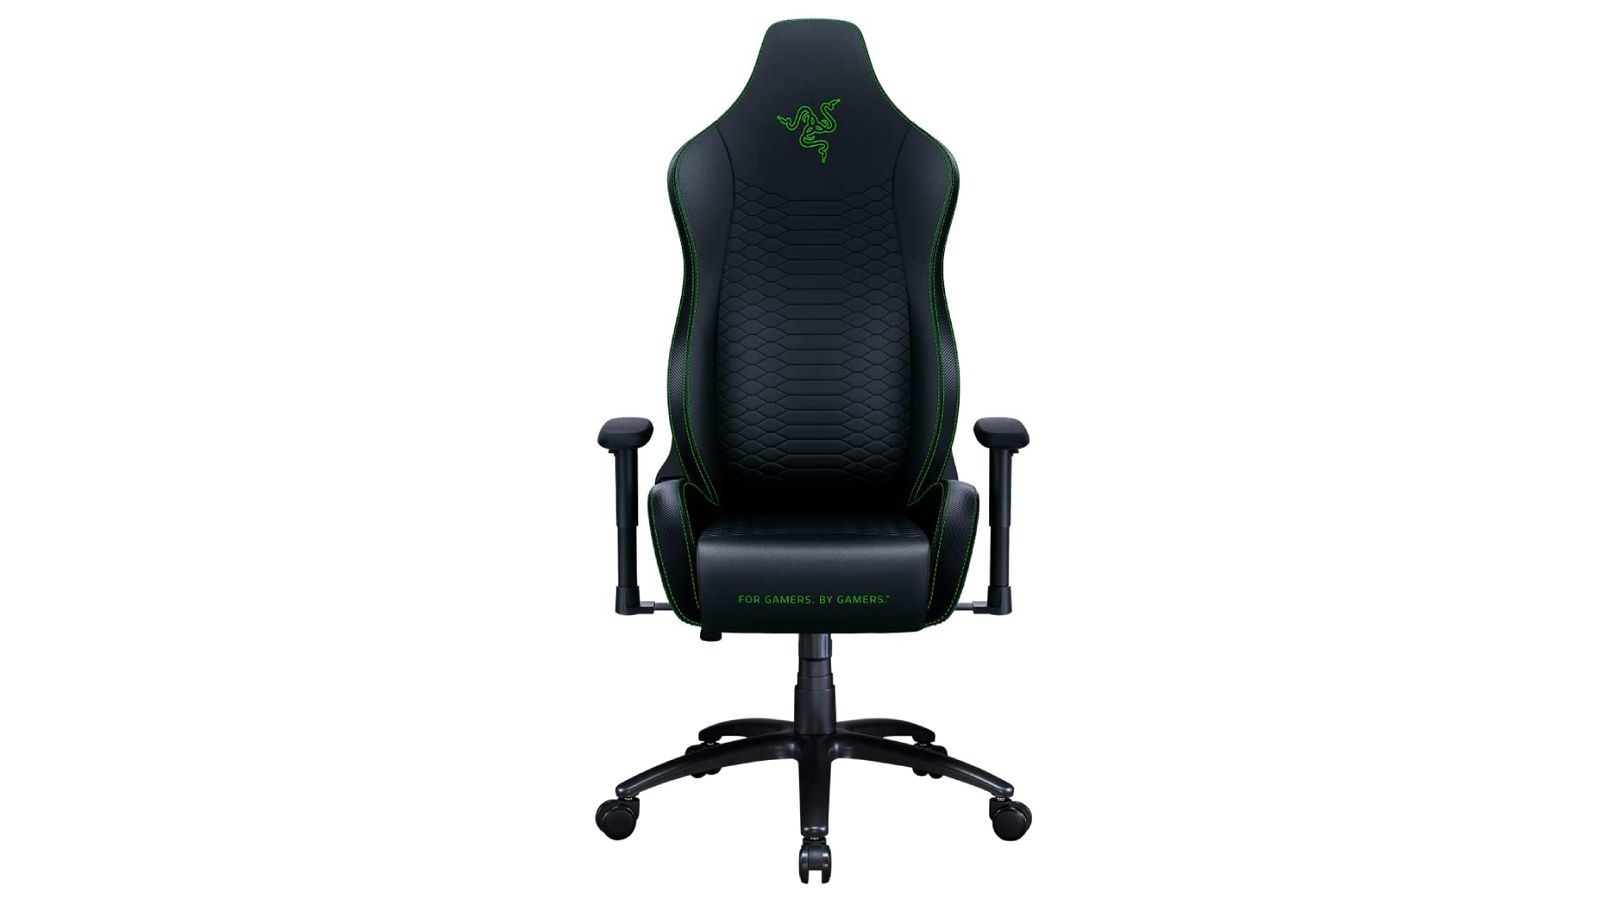 Razer Iskur product image of a black gaming chair with green details.